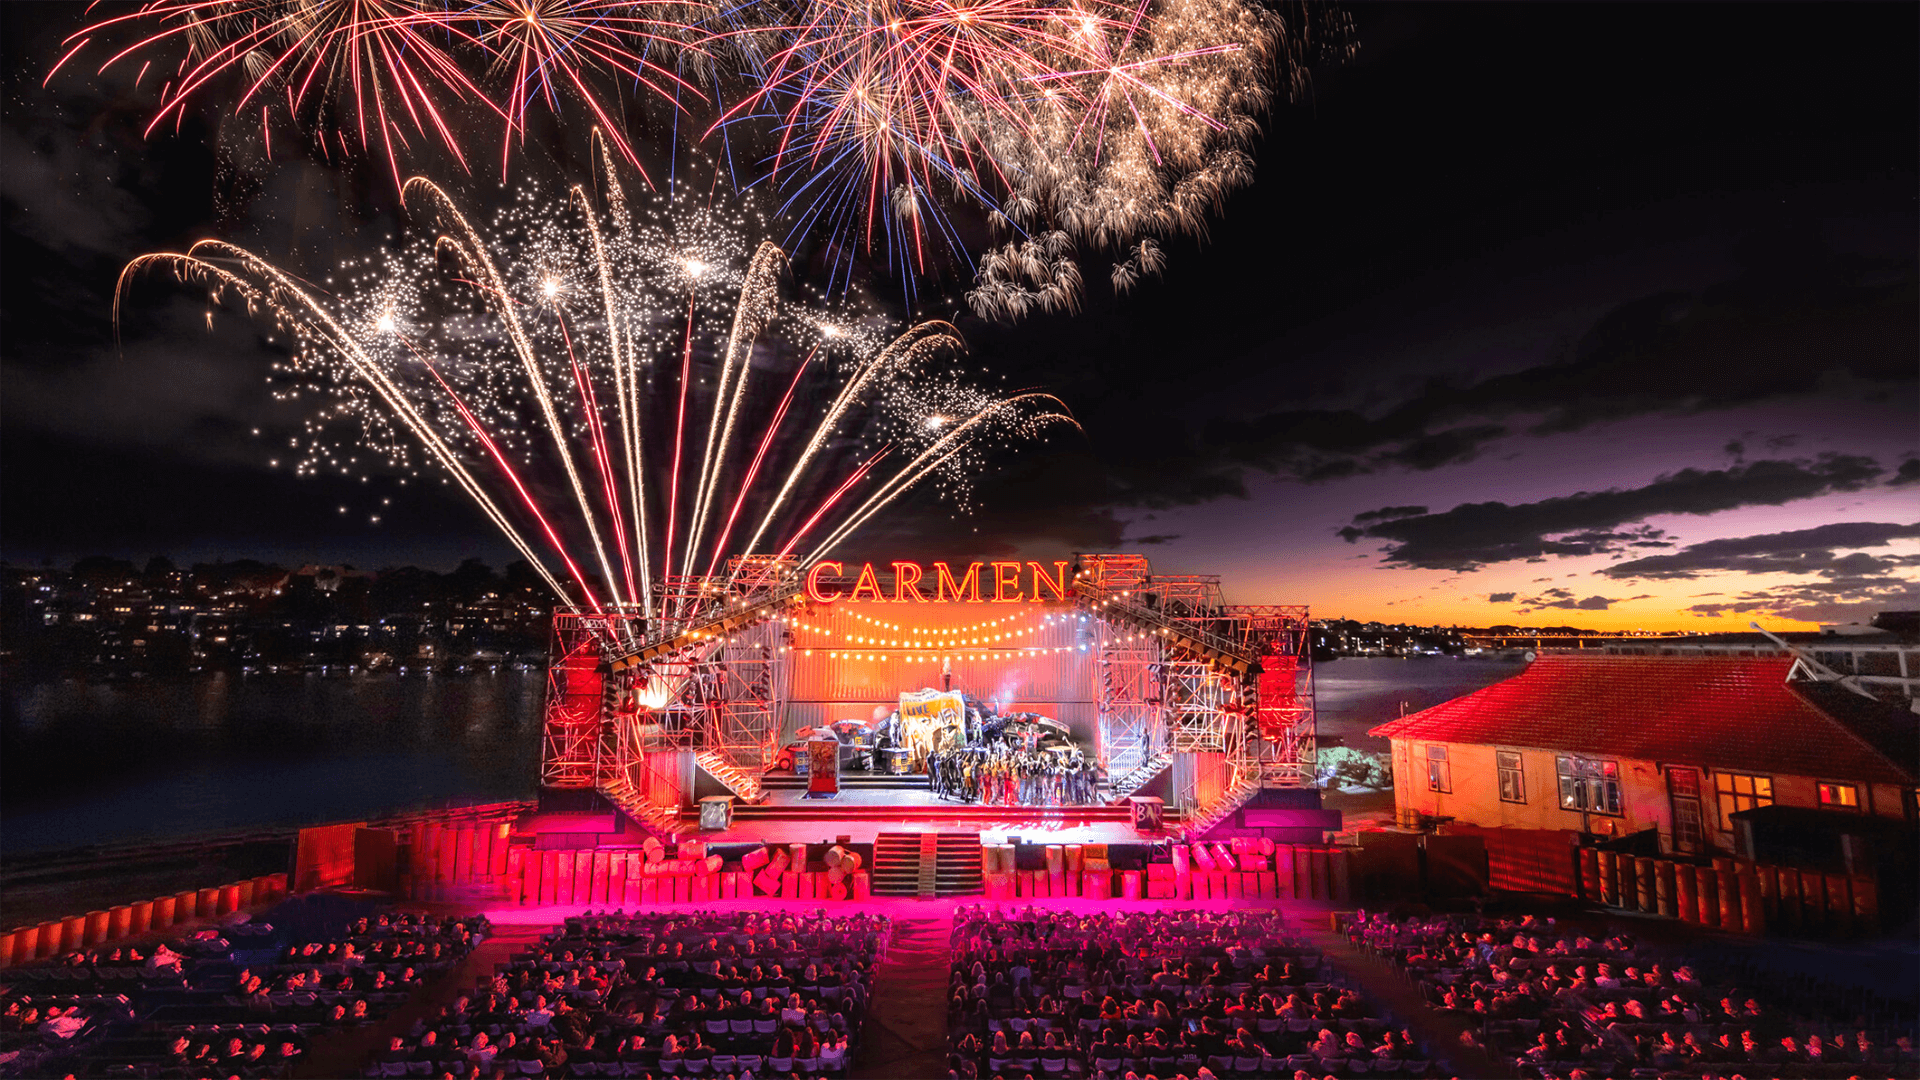 The stage of Carmen on Cockatoo Island flanked by fireworks featuring graphics by VANDAL